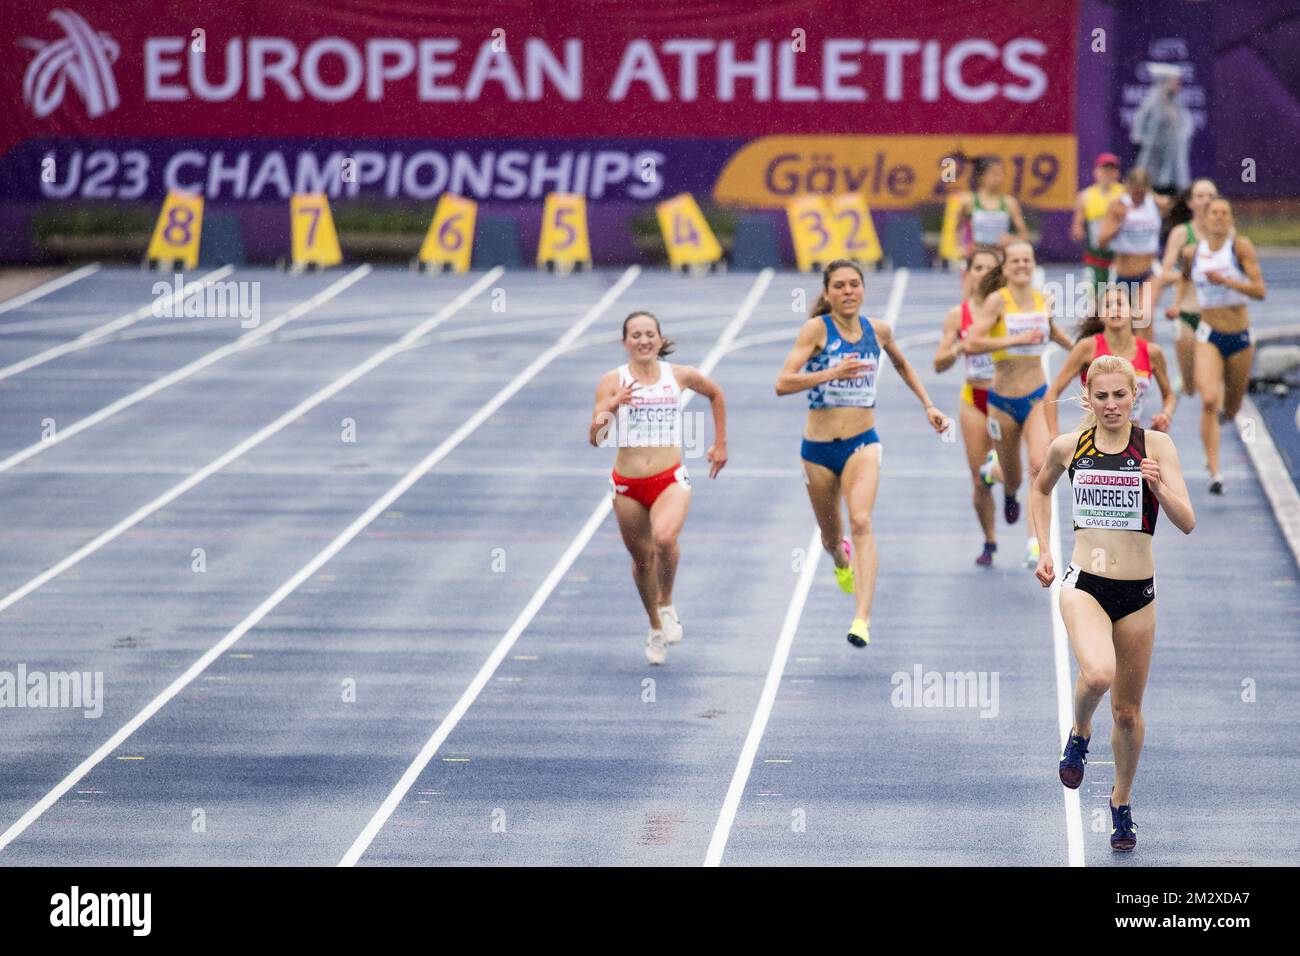 Belgian Elise Vanderelst (R) pictured in action during the 1500m race on the second day of the European Athletics U23 Championships, Friday 12 July 2019 in Gavle, Sweden. BELGA PHOTO JASPER JACOBS Stock Photo